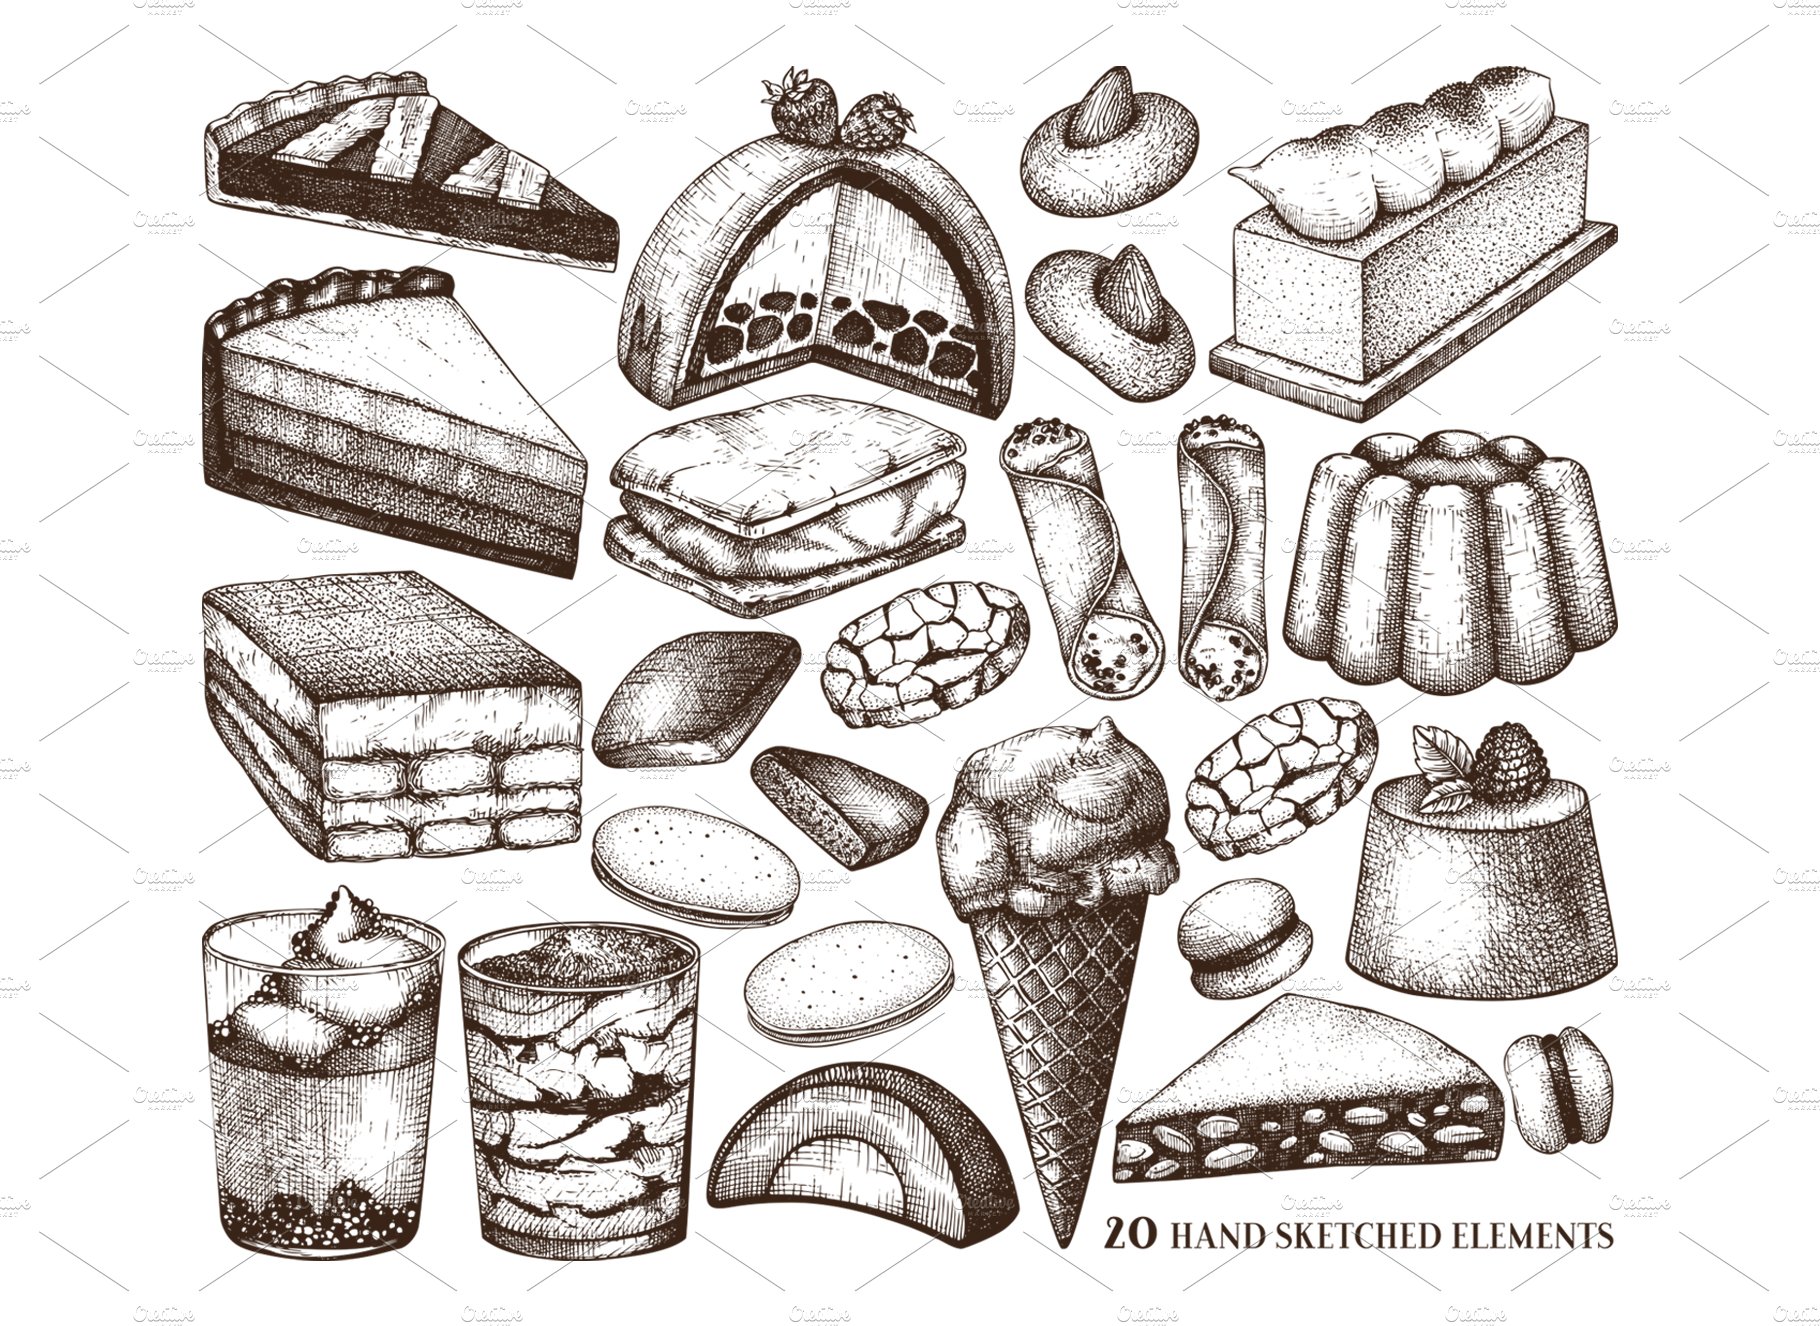 Italian Desserts. Pastries Sketches preview image.